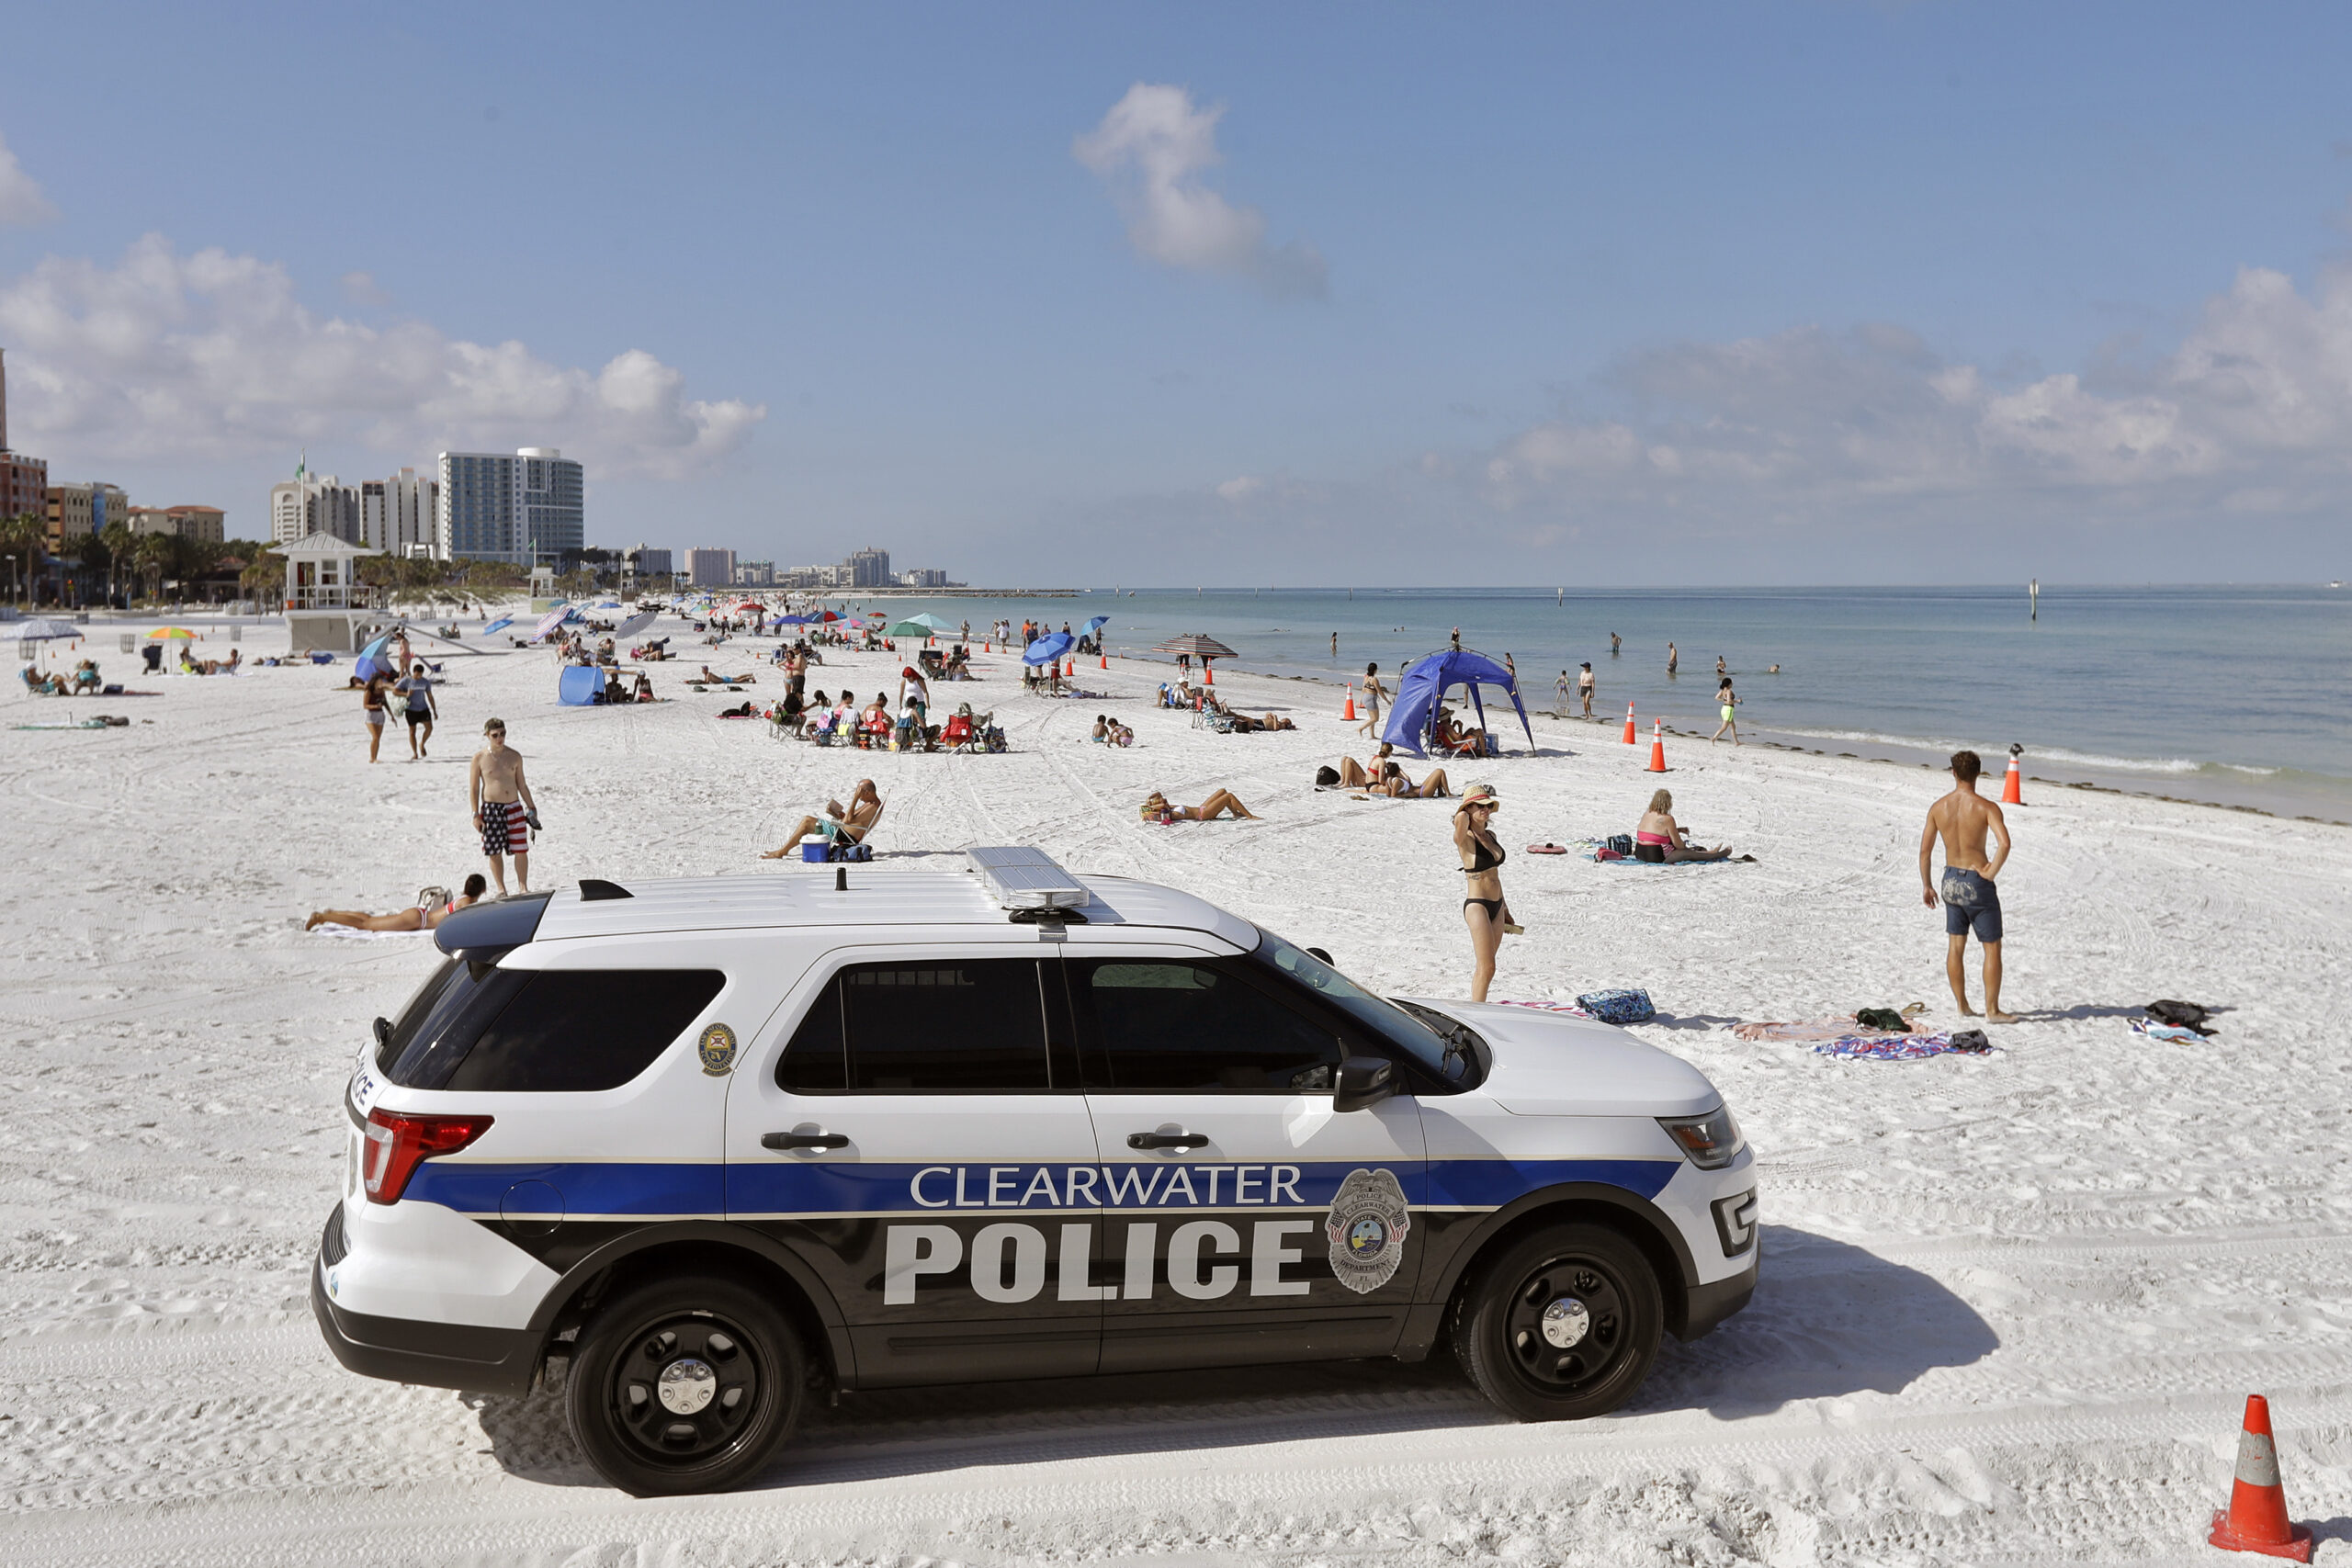 FILE - In this Monday, May 4, 2020 file photo, police officers patrol the area after Clearwater Beach officially reopened to the public in Clearwater Beach, Fla. Florida is among several states that amplified their 2021-2022 budgets with at least part of their share of a $195 billion state aid package from the recent American Rescue Plan Act signed by President Joe Biden. The state's record $101.5 billion budget is up roughly 11%, with bonuses for teachers, police and firefighters, and new construction projects at schools and colleges. (AP Photo/Chris O'Meara, File)